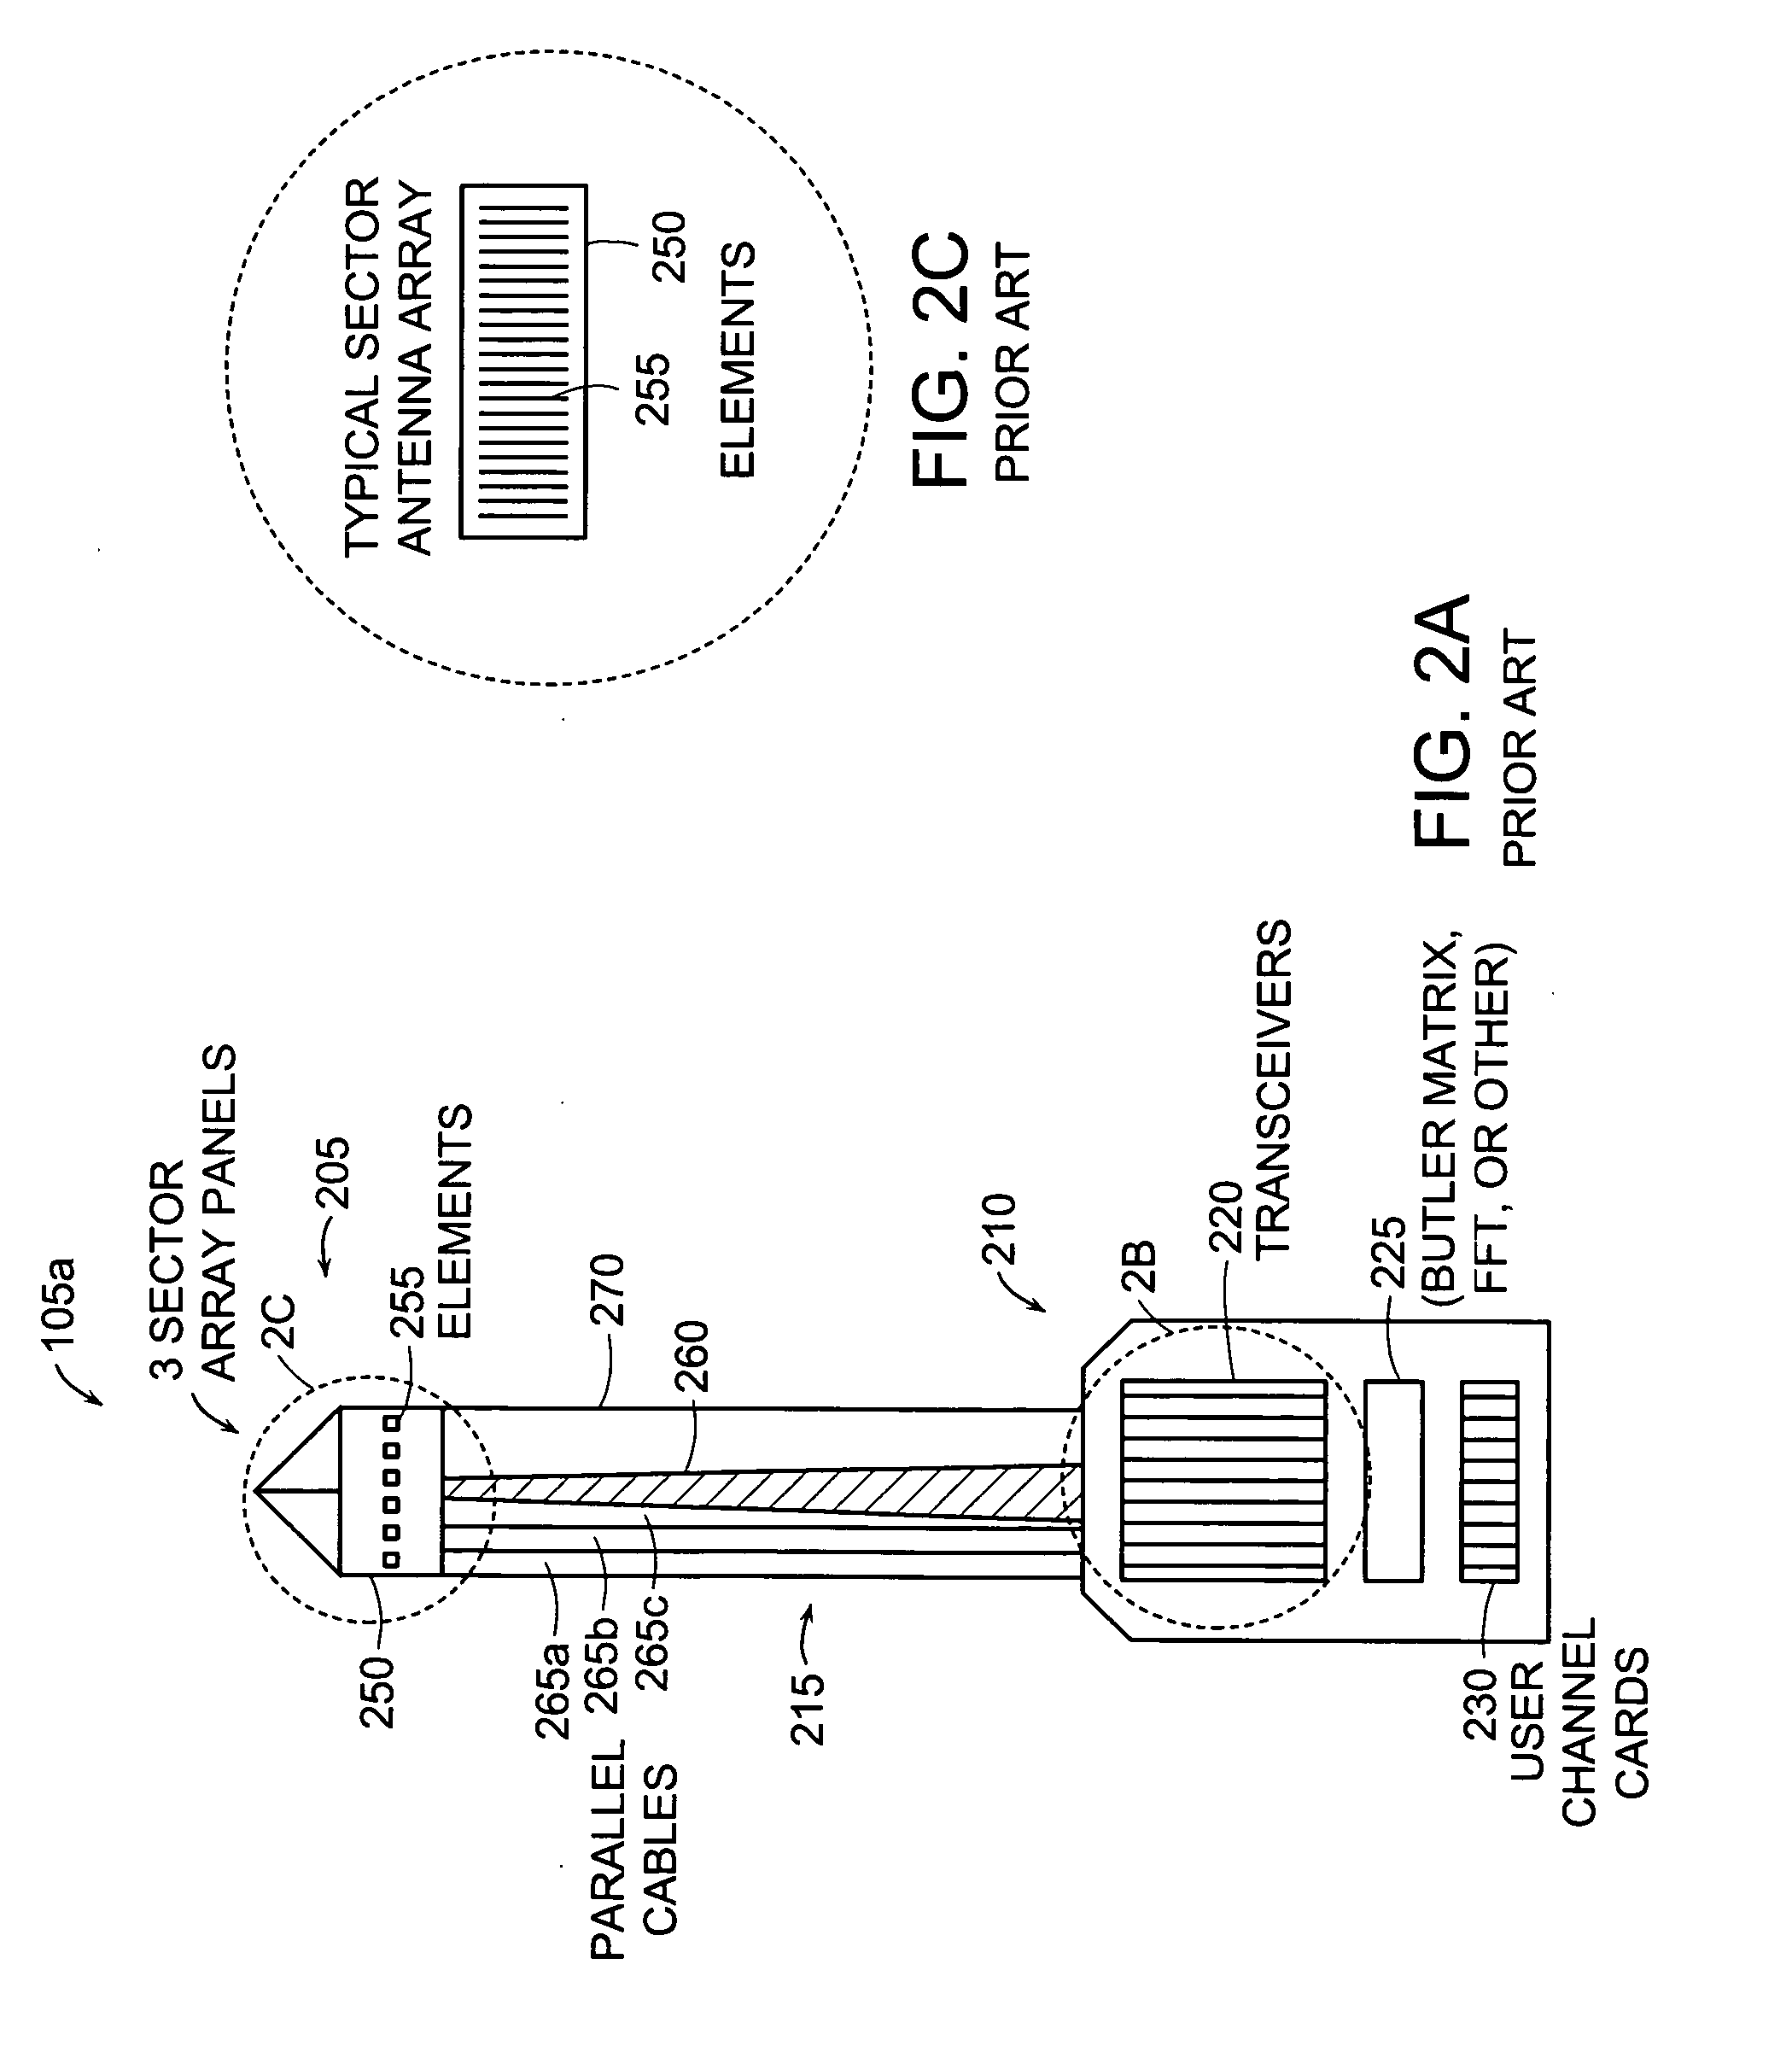 Method and system for economical beam forming in a radio communication system